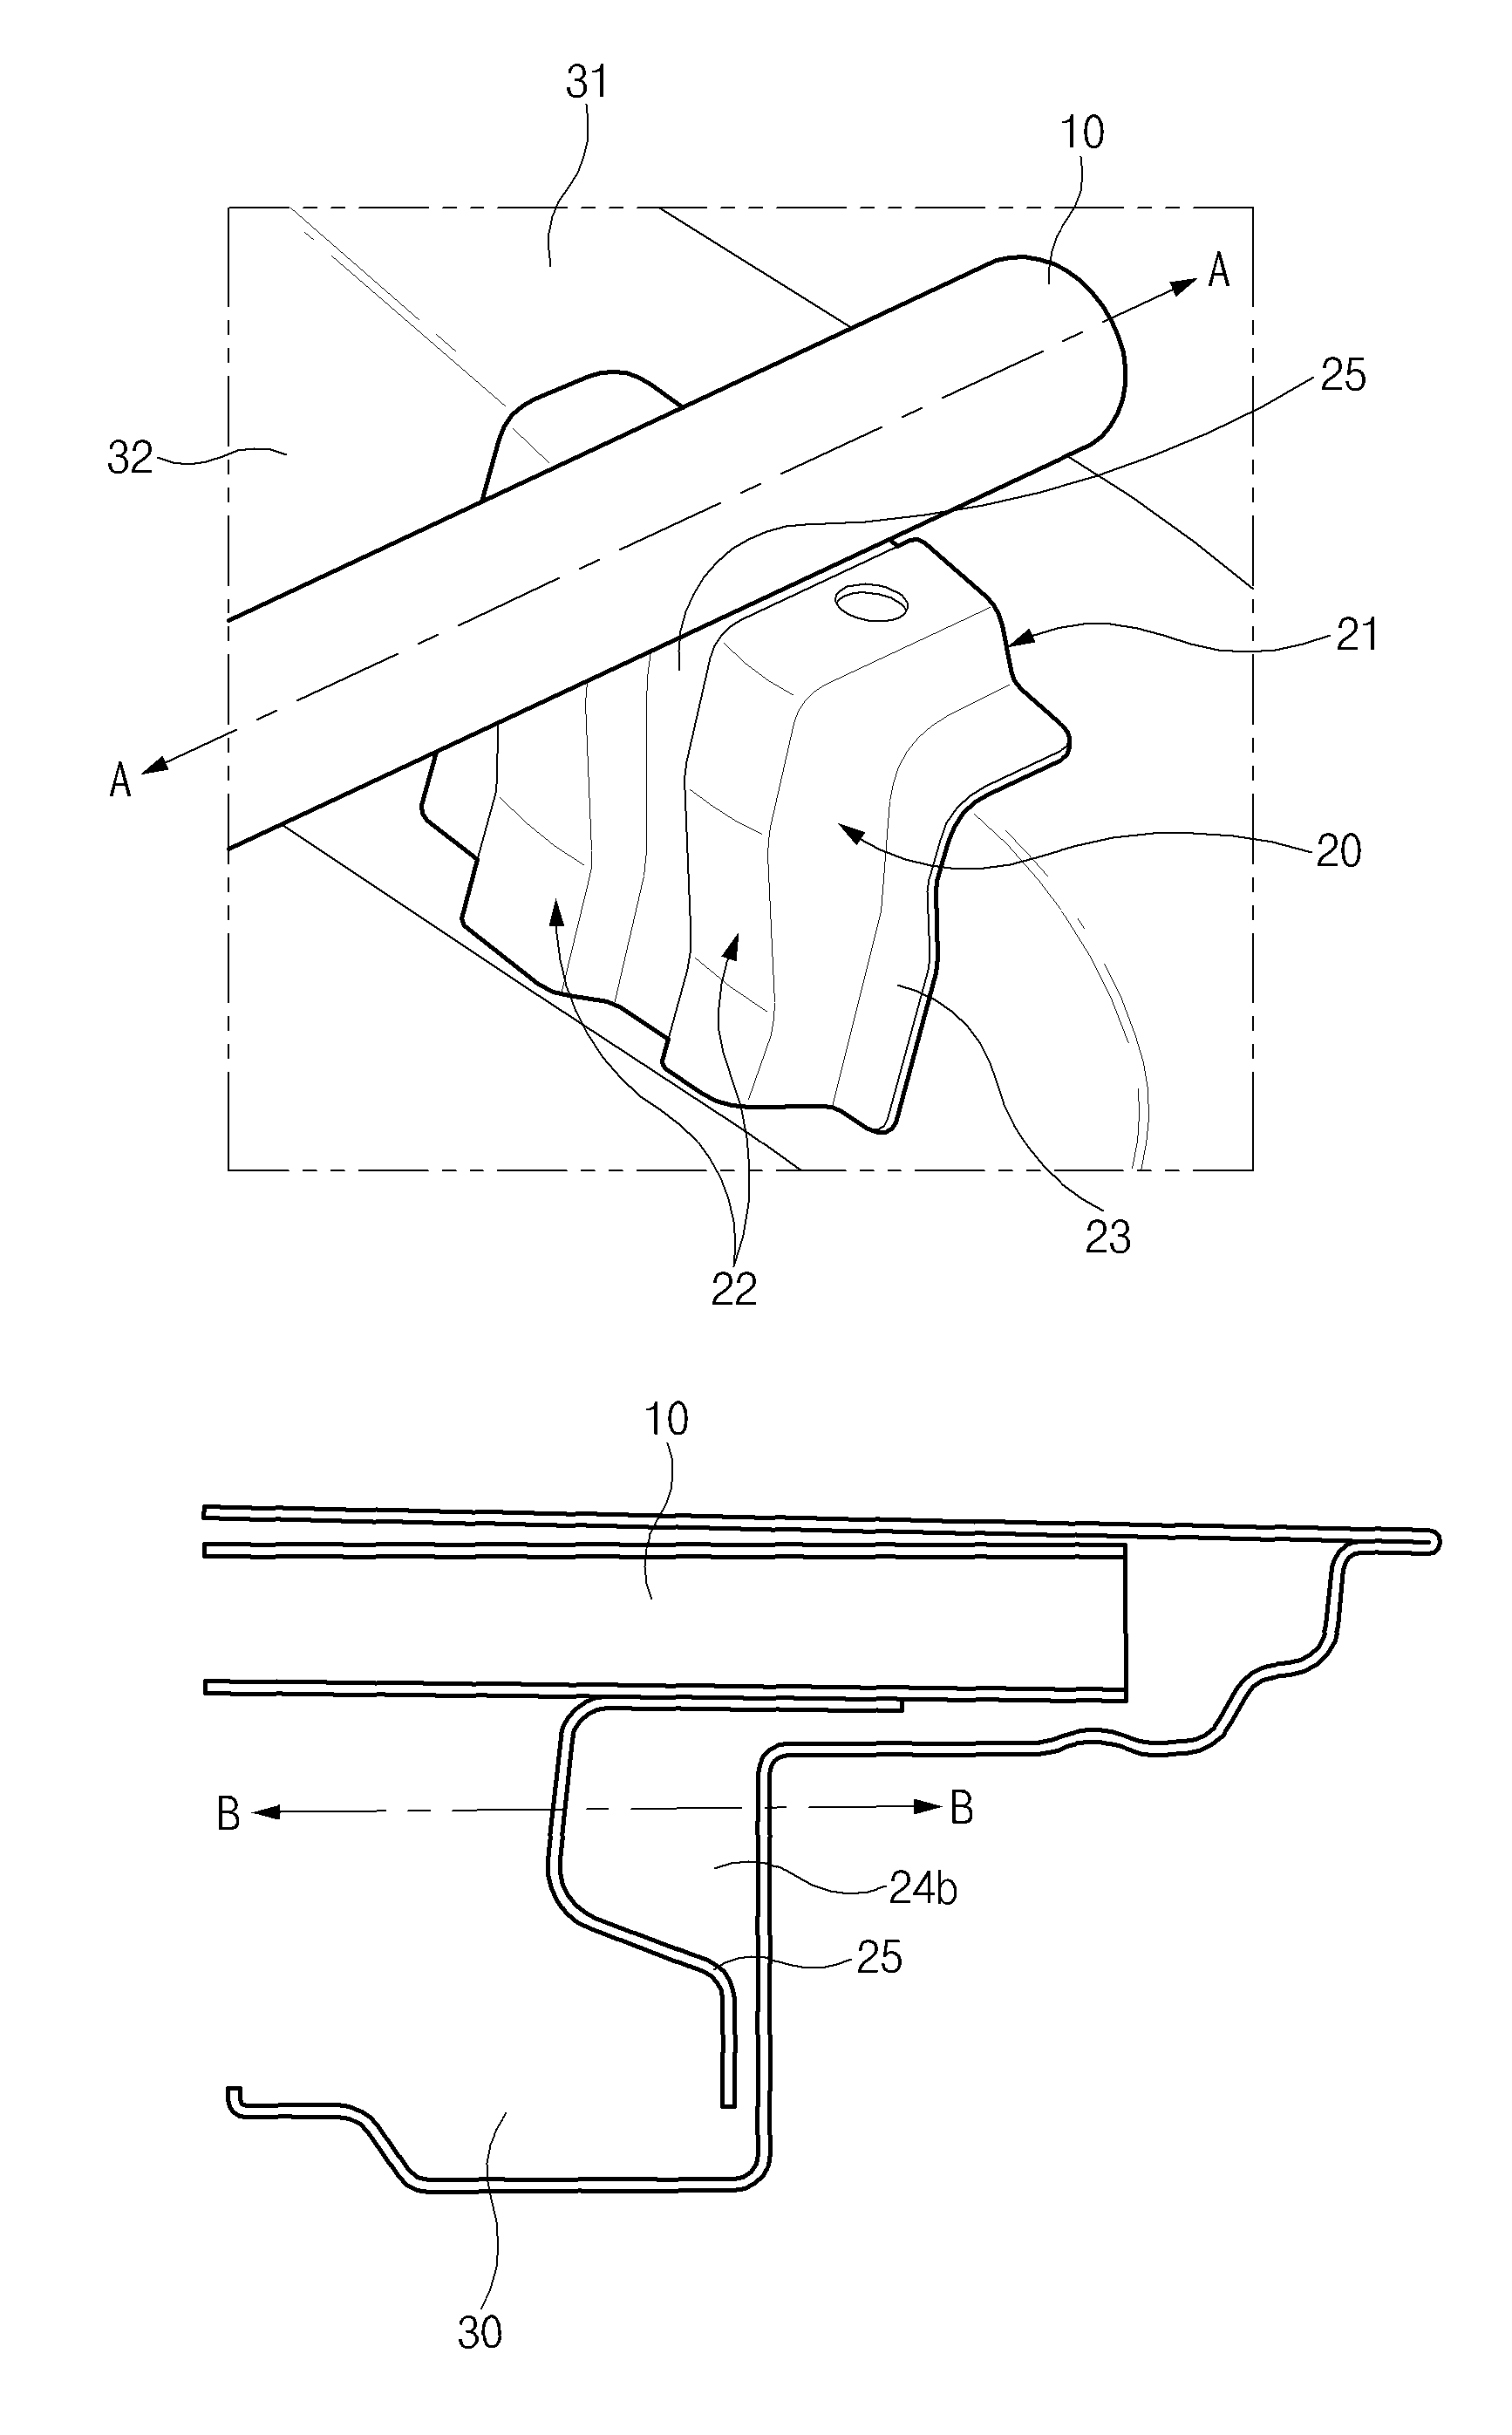 Supporting structure of door impact beam for vehicle